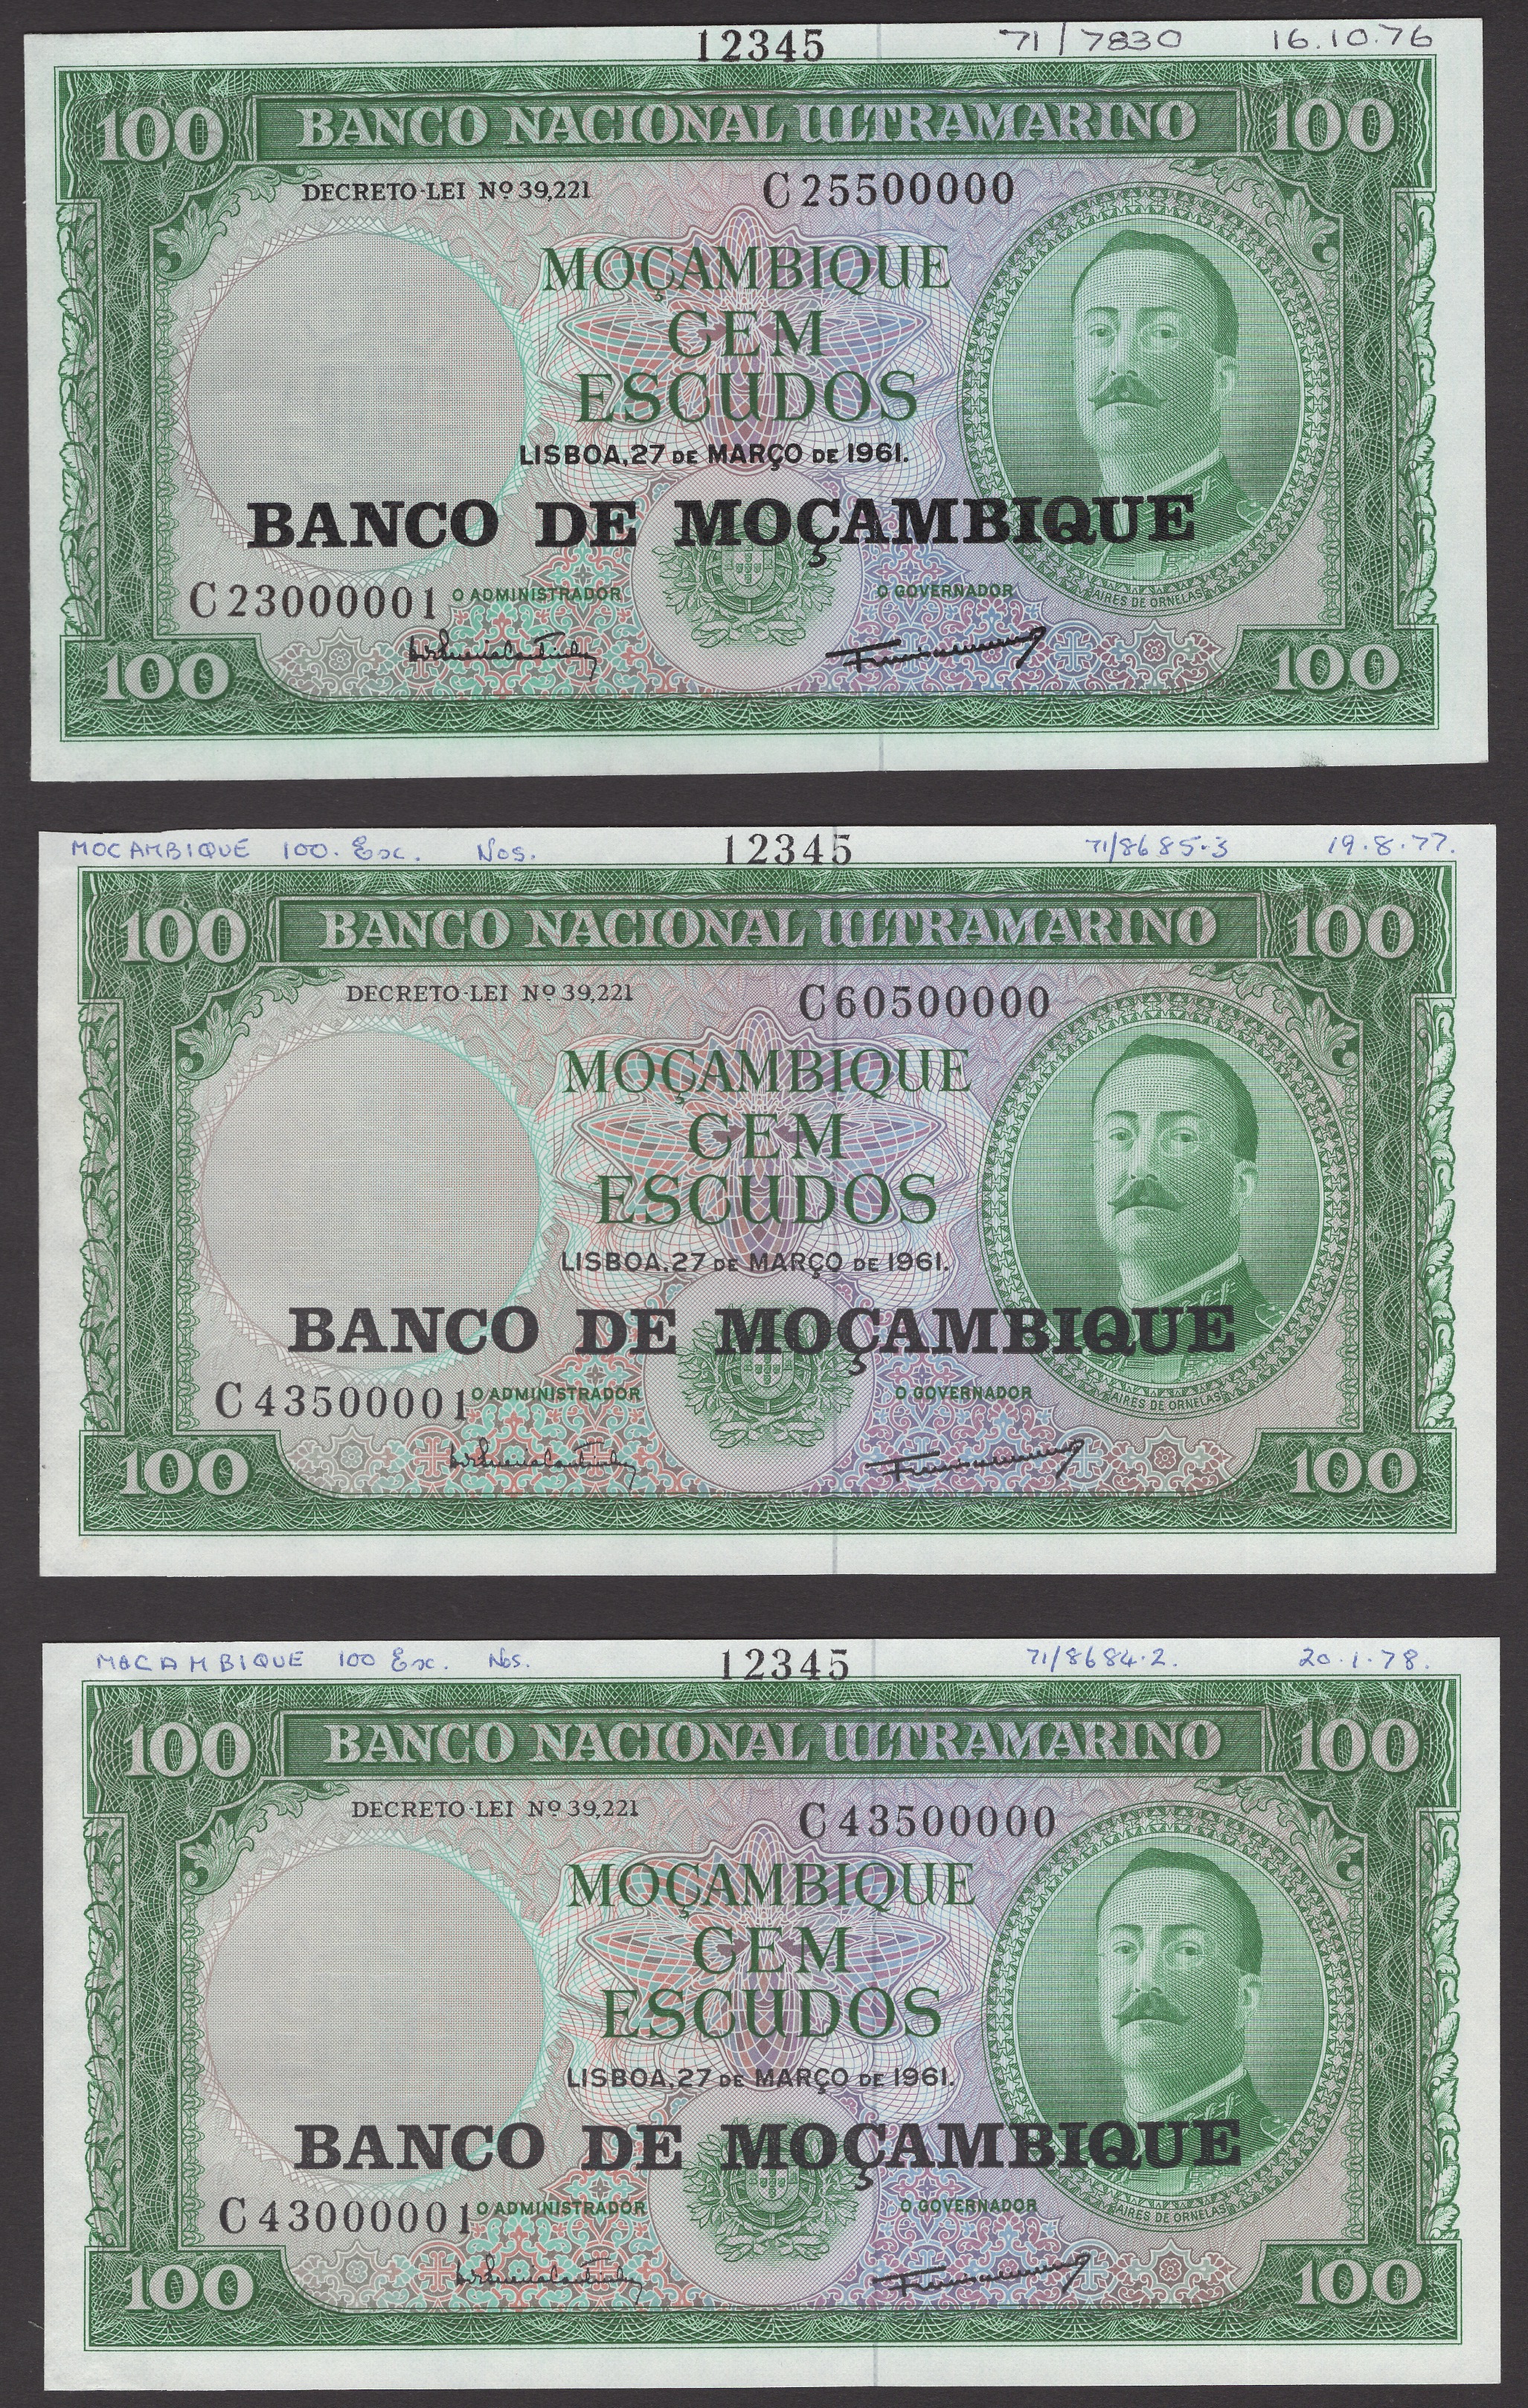 Banco de Mocambique, a remarkable full range of specimens and proofs for the overprinted...